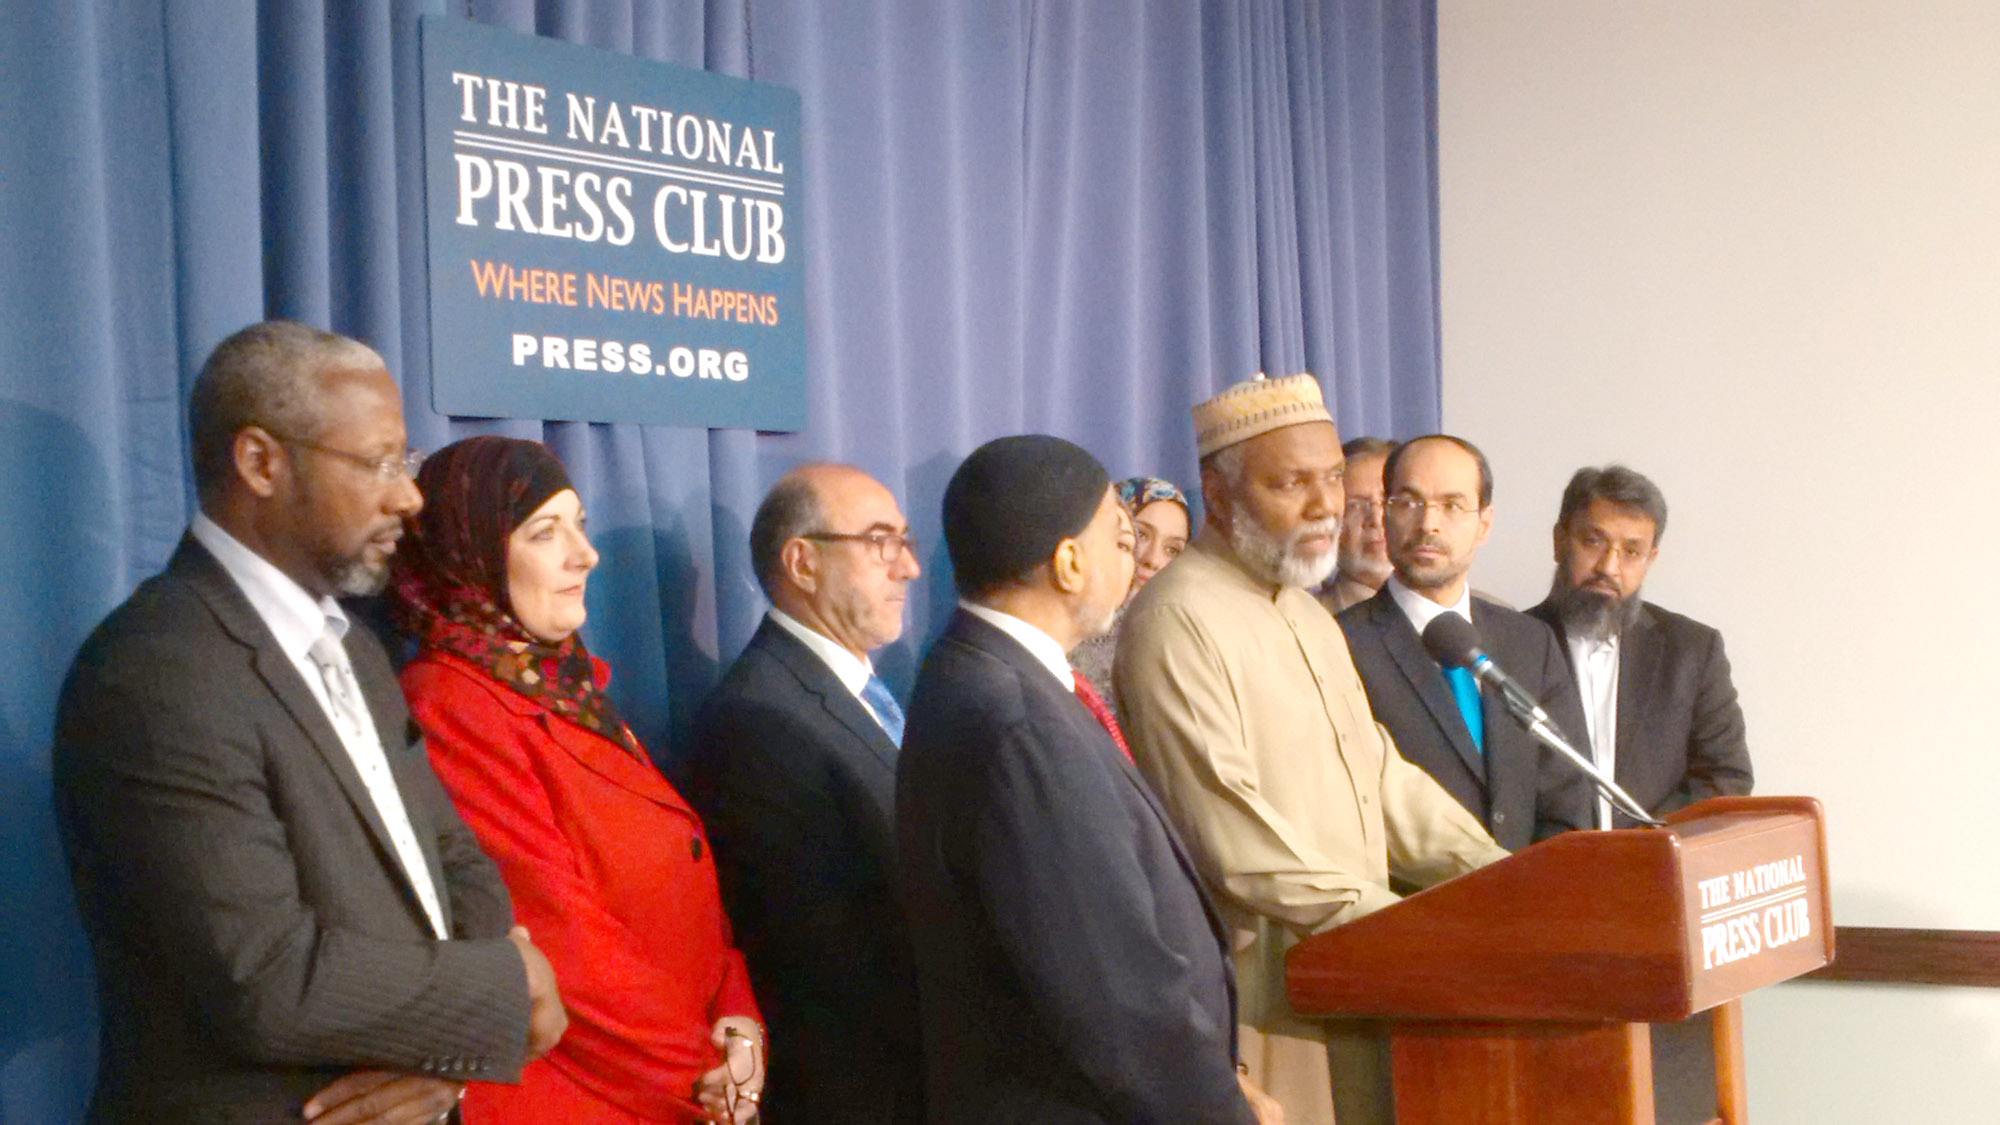 Climate of Islamophobia worse now than after 9/11 - Muslim-American leaders say